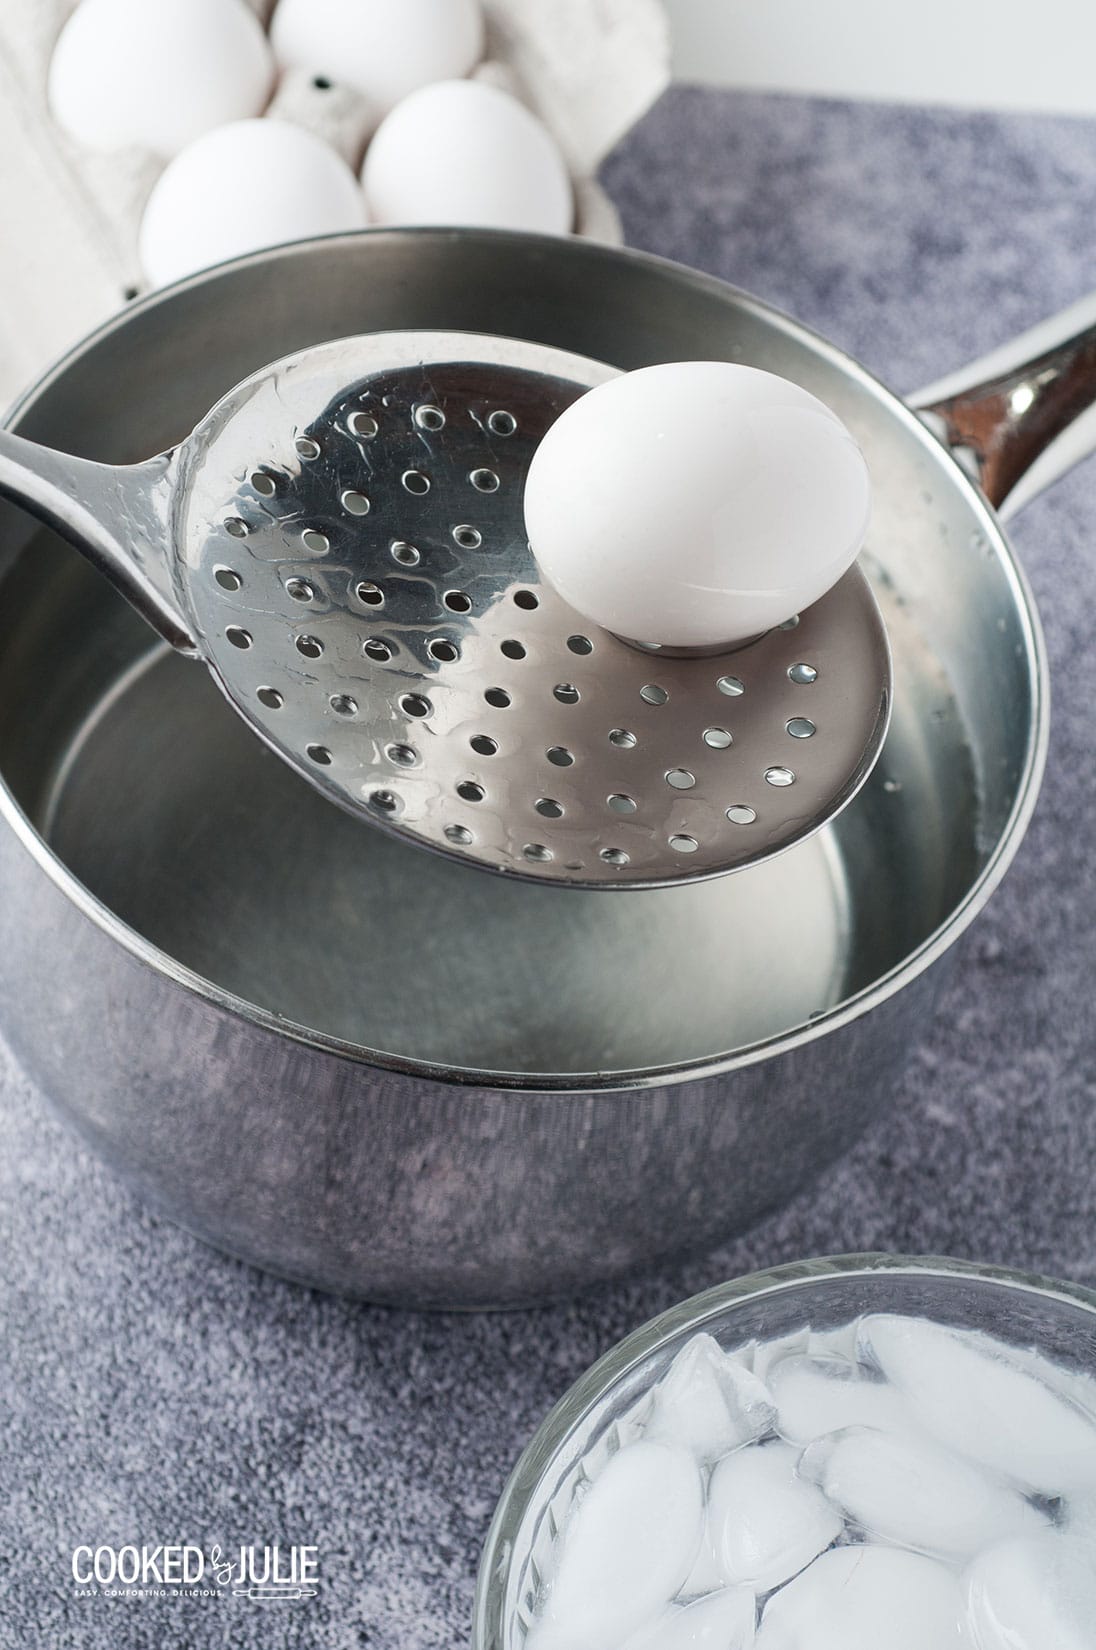 a straining spoon lifting a white egg out of a metal saucepan